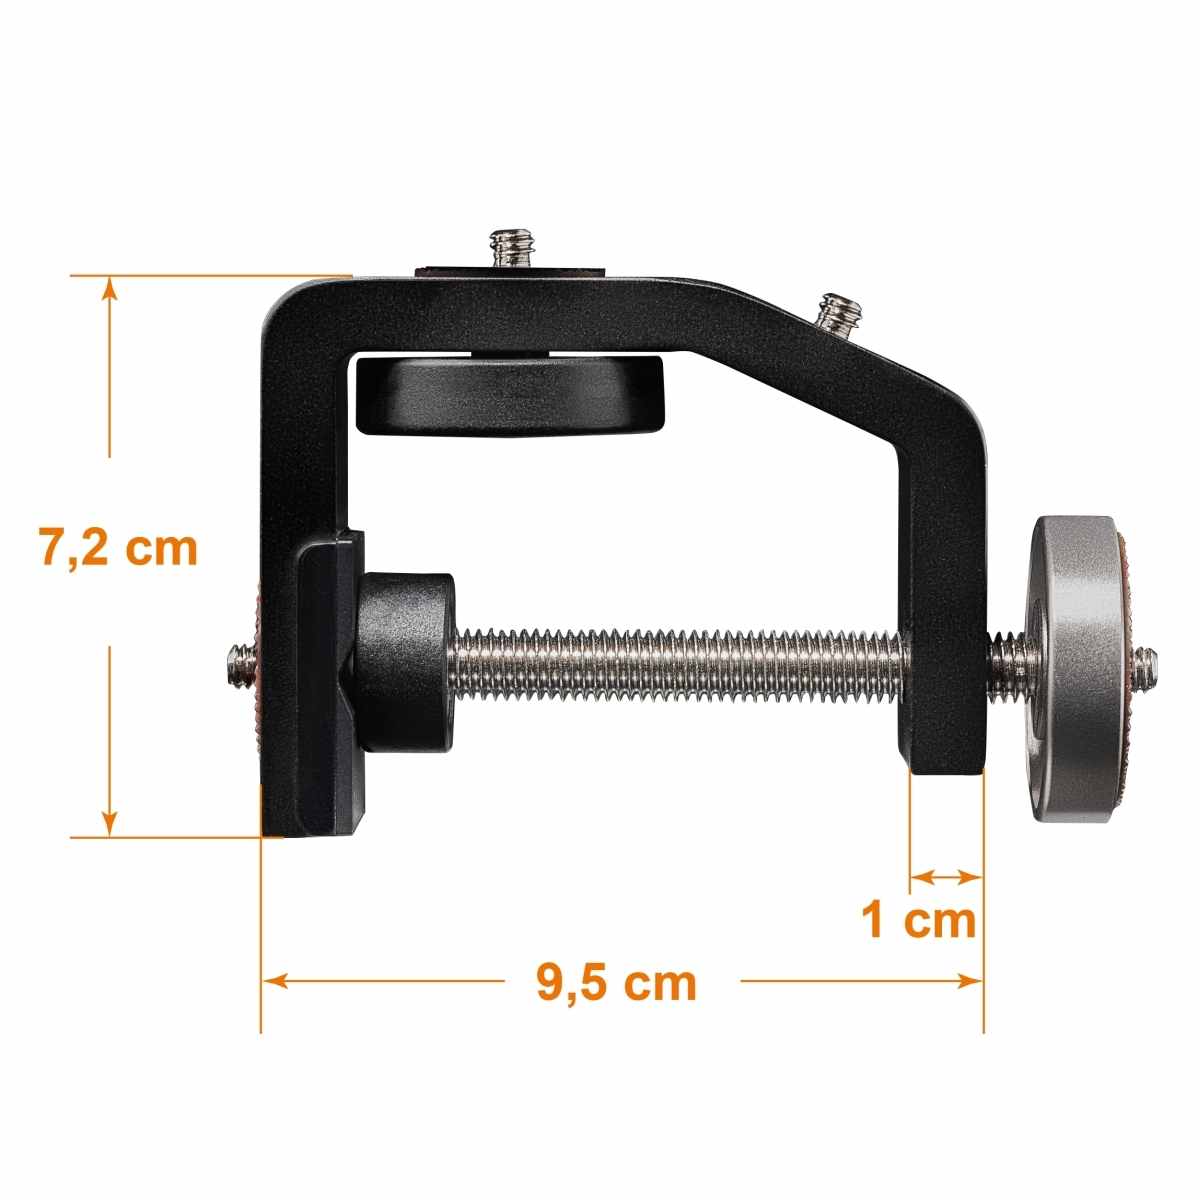 Walimex pro KX-20 Stand Clamp